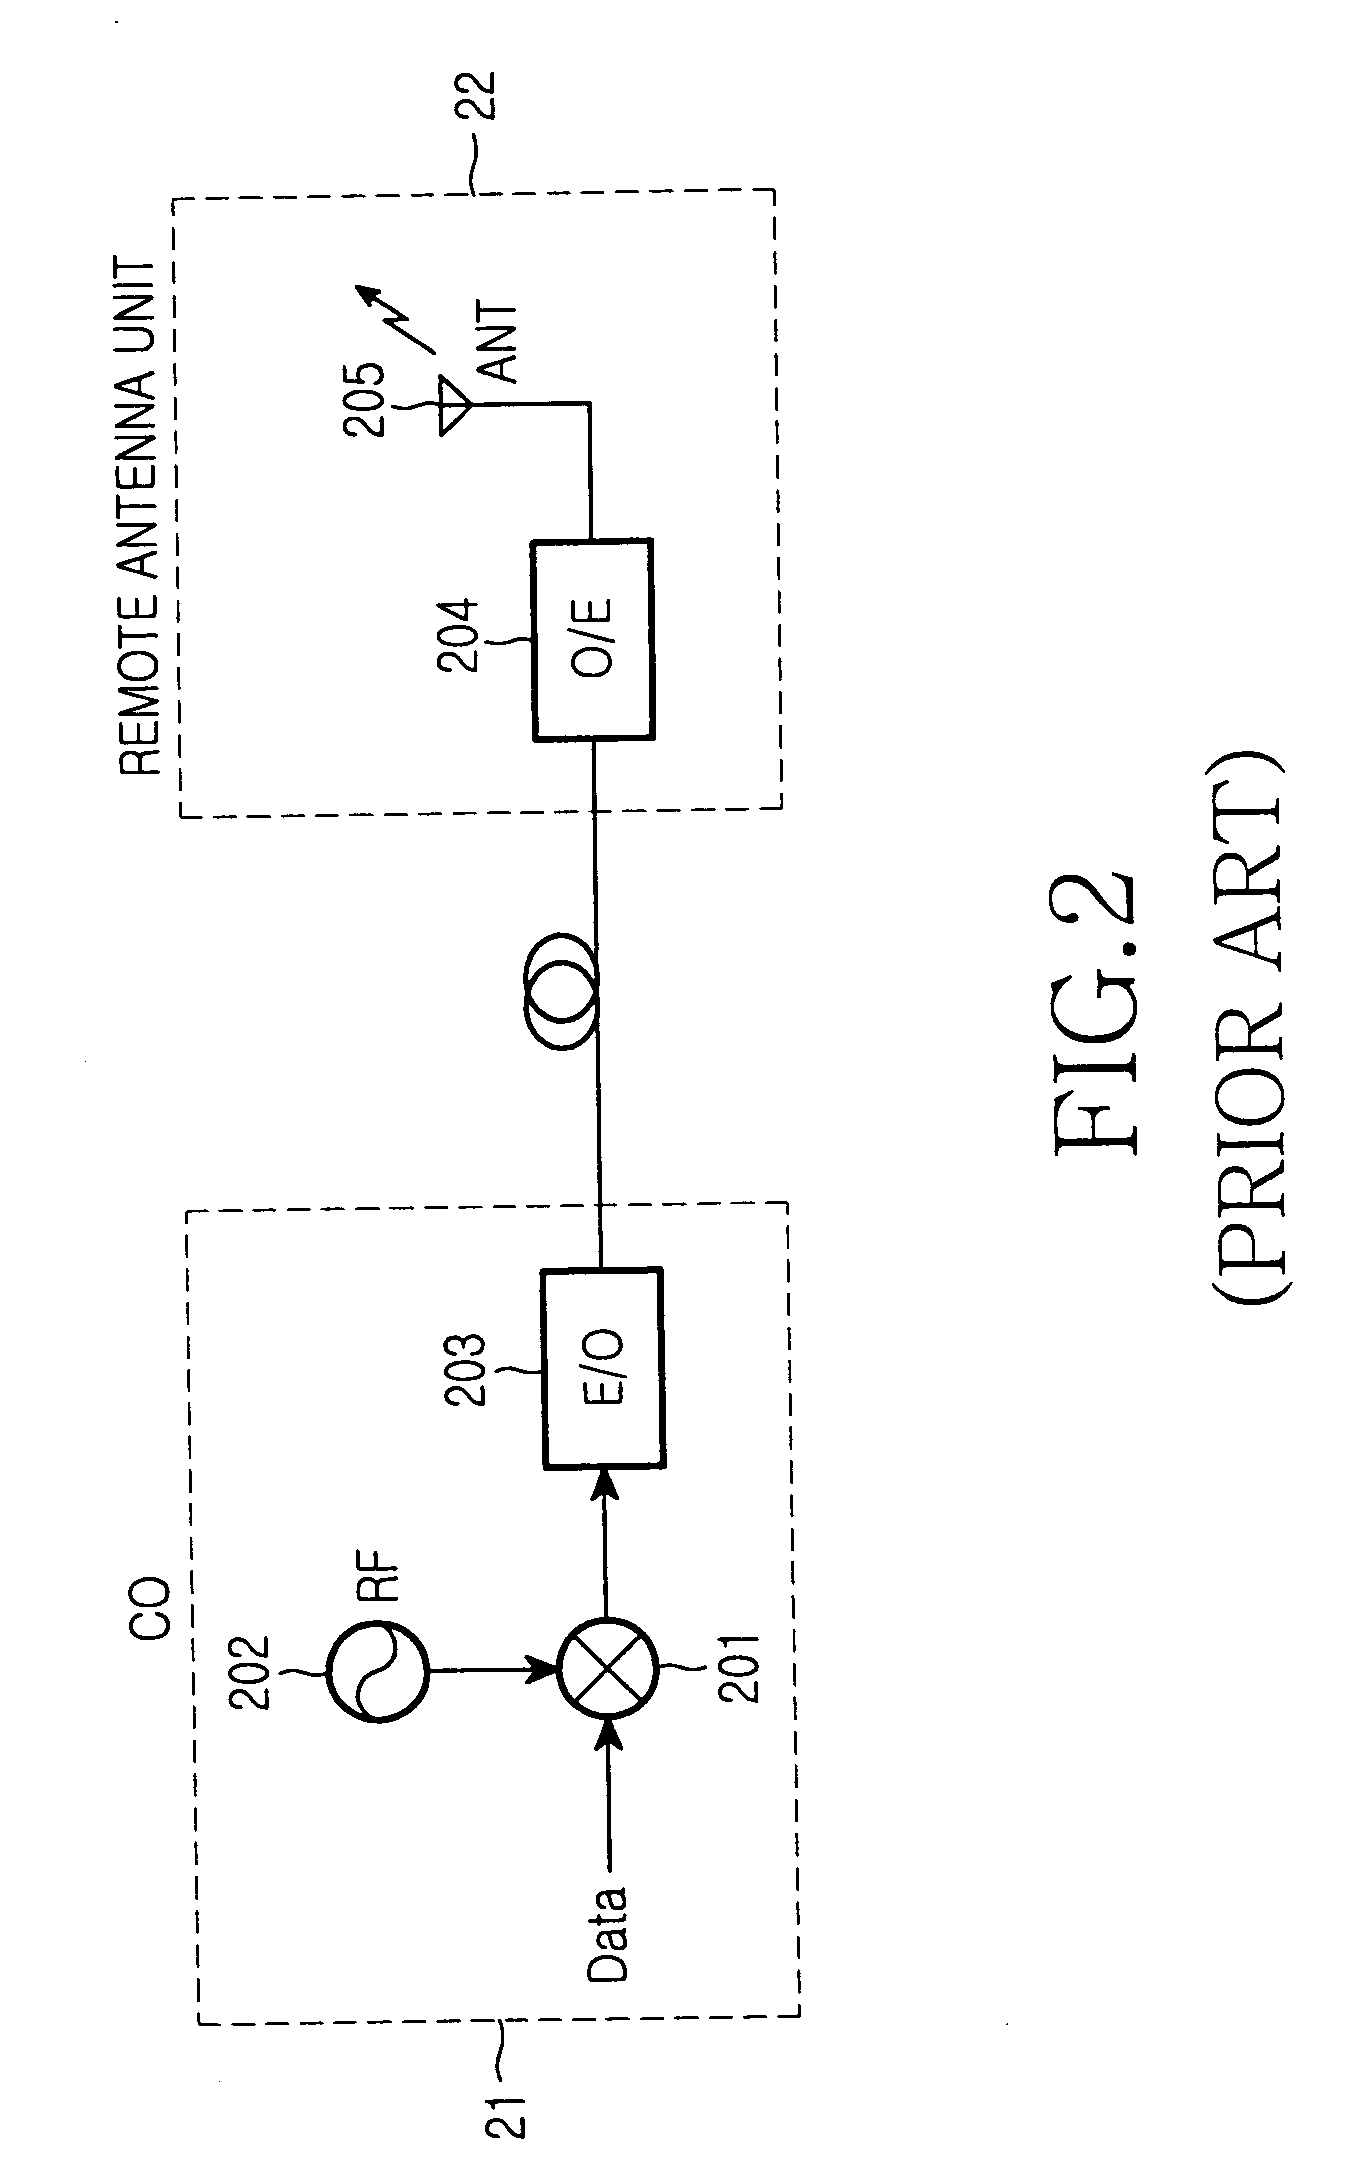 Integrated wired and wireless WDM PON apparatus using mode-locked light source